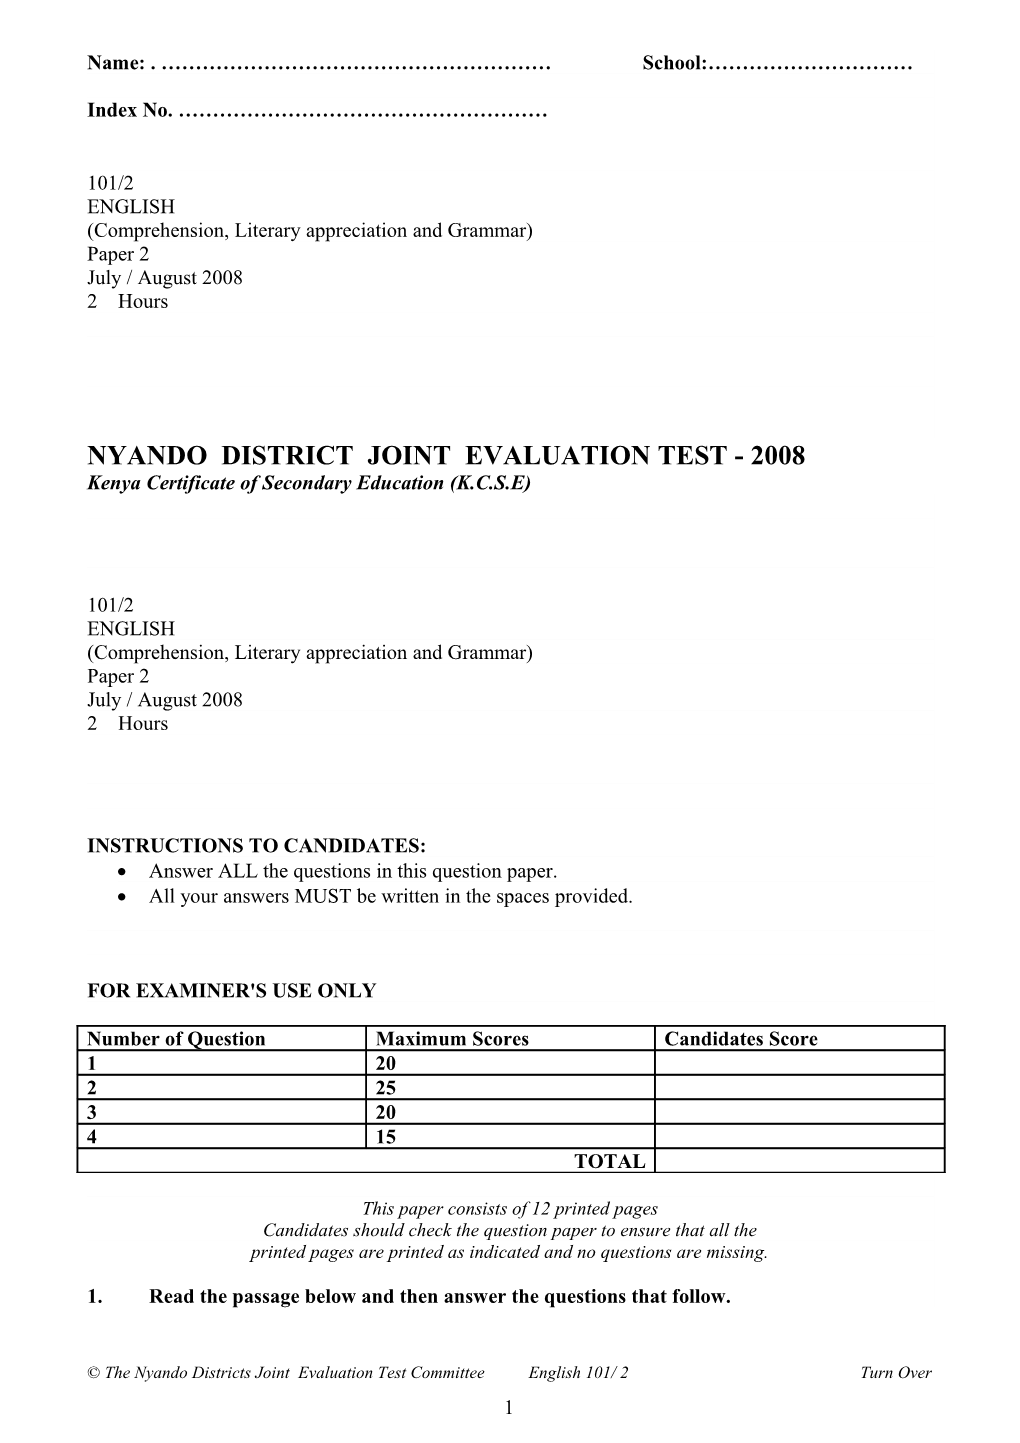 Nyando District Joint Evaluation Test - 2008